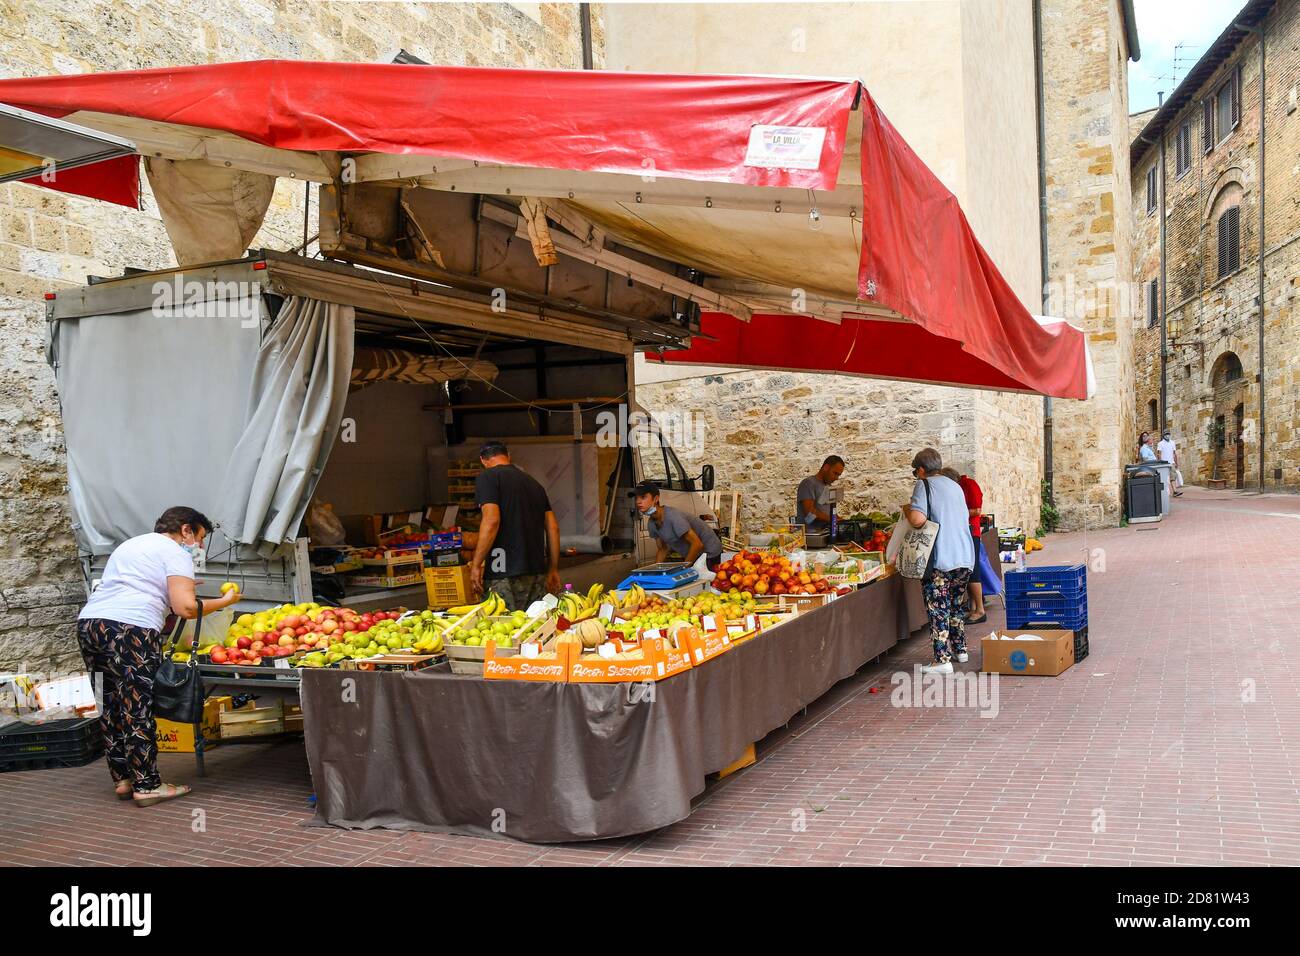 People shopping at a fruits and vegetables market stall in the old town of San Gimignano, Unesco World Heritage Site, Siena, Tuscany, Italy Stock Photo